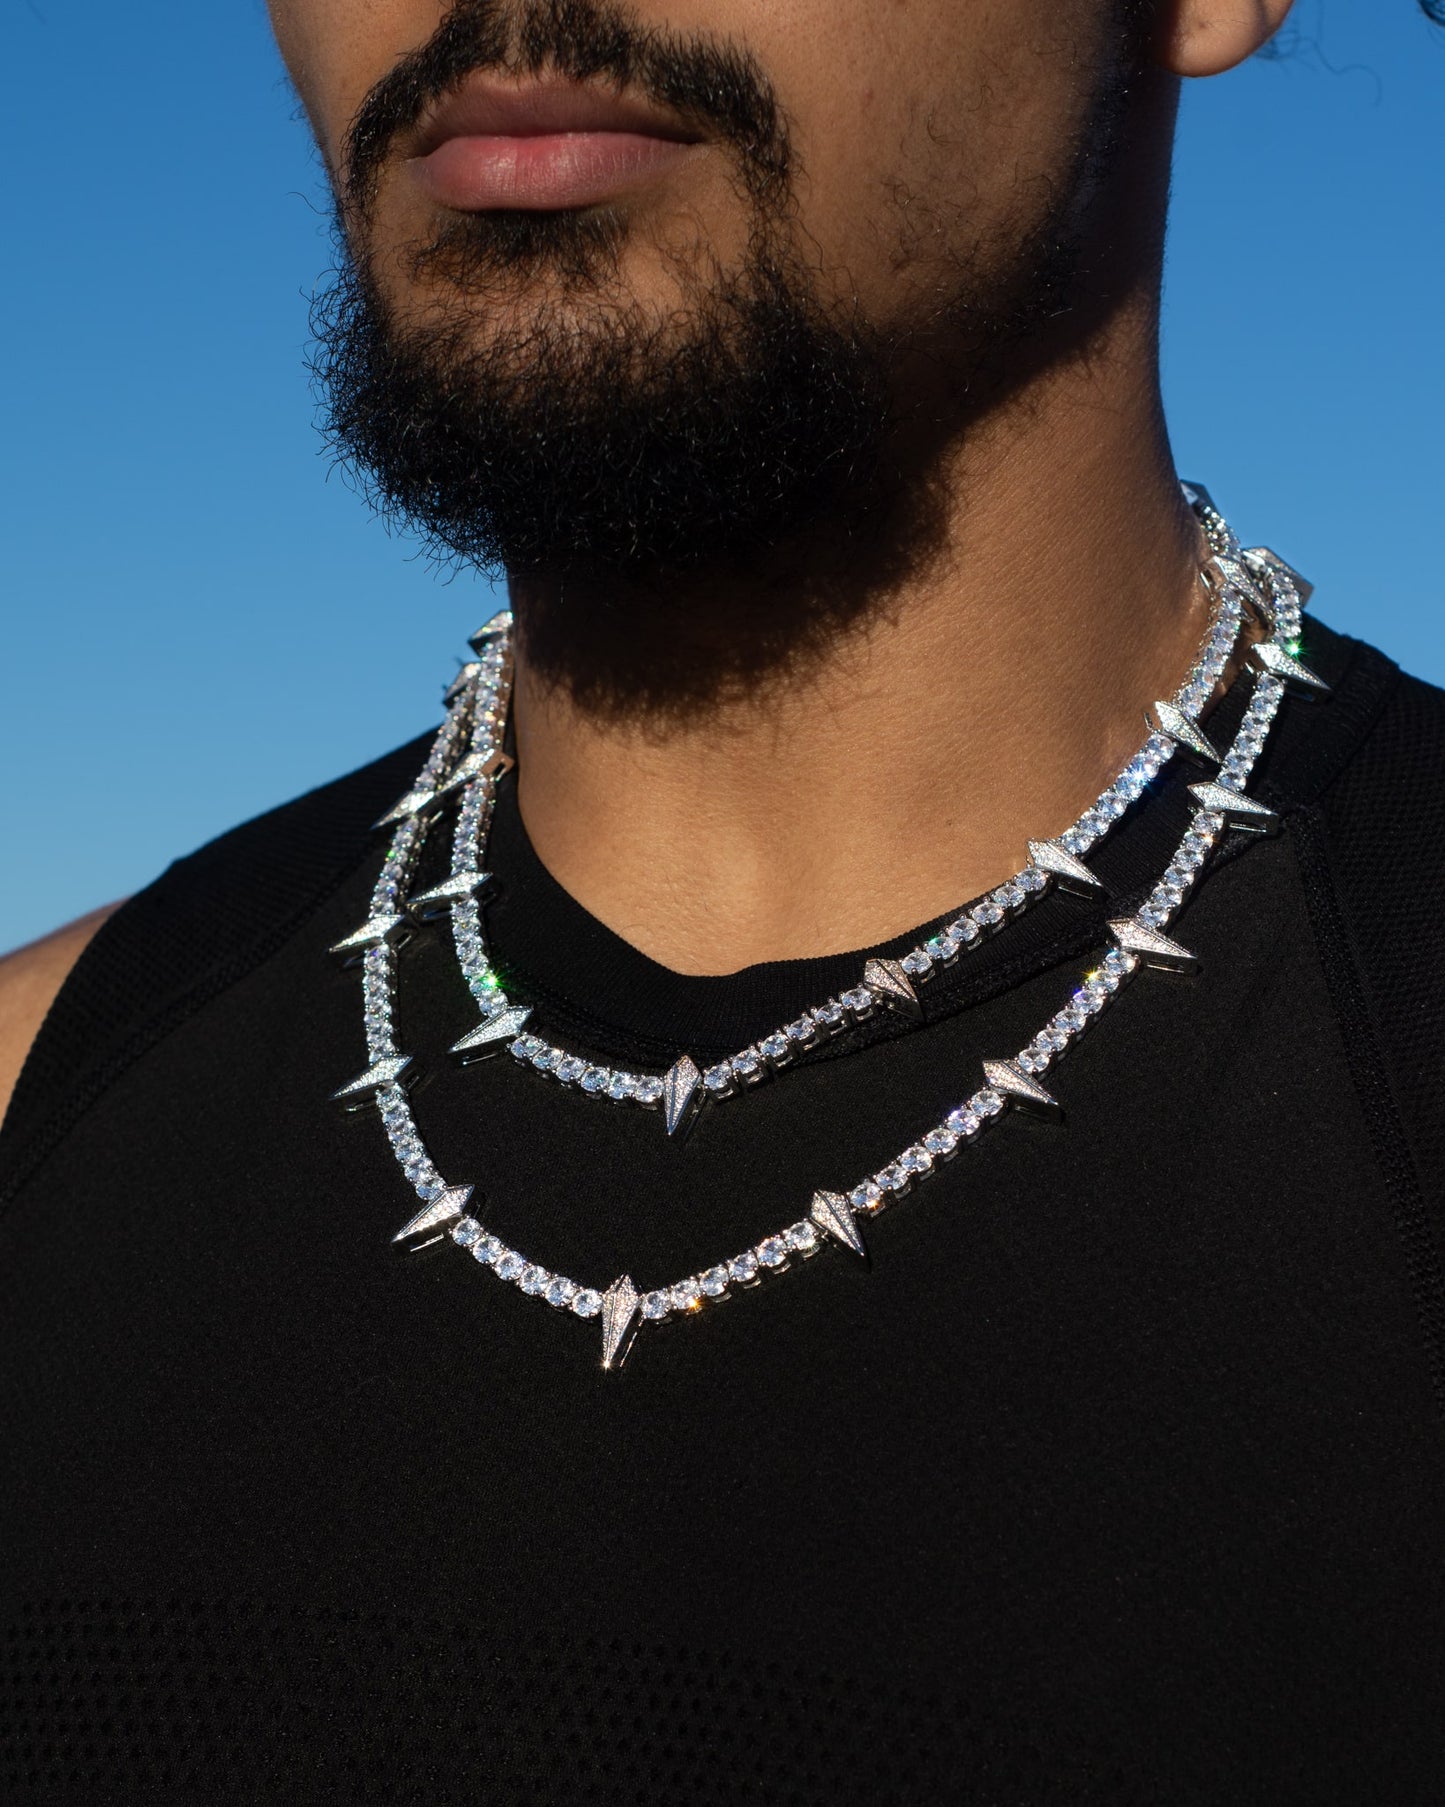 OXALA Panther Claw Spiked Tennis Chain